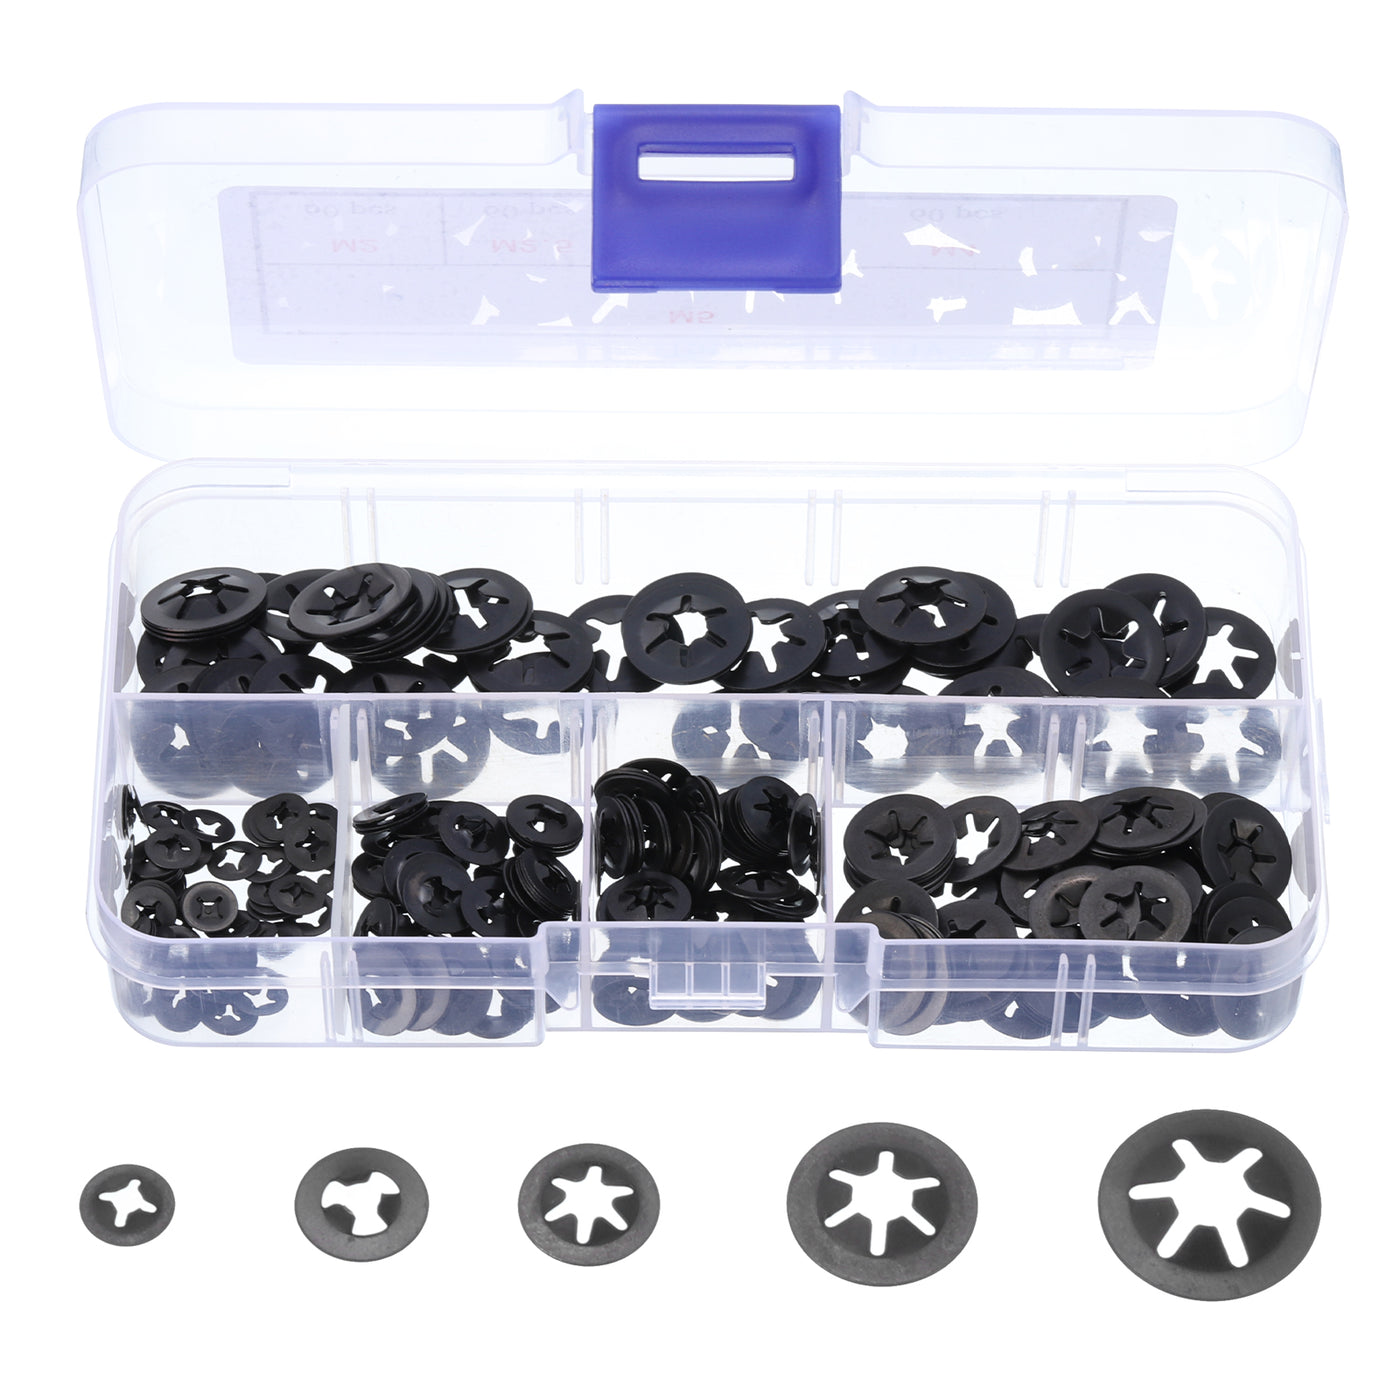 uxcell Uxcell 300pcs Internal Tooth Star Lock Washers M2 M2.5 M3 M4 M5, 65Mn Steel Push Nuts